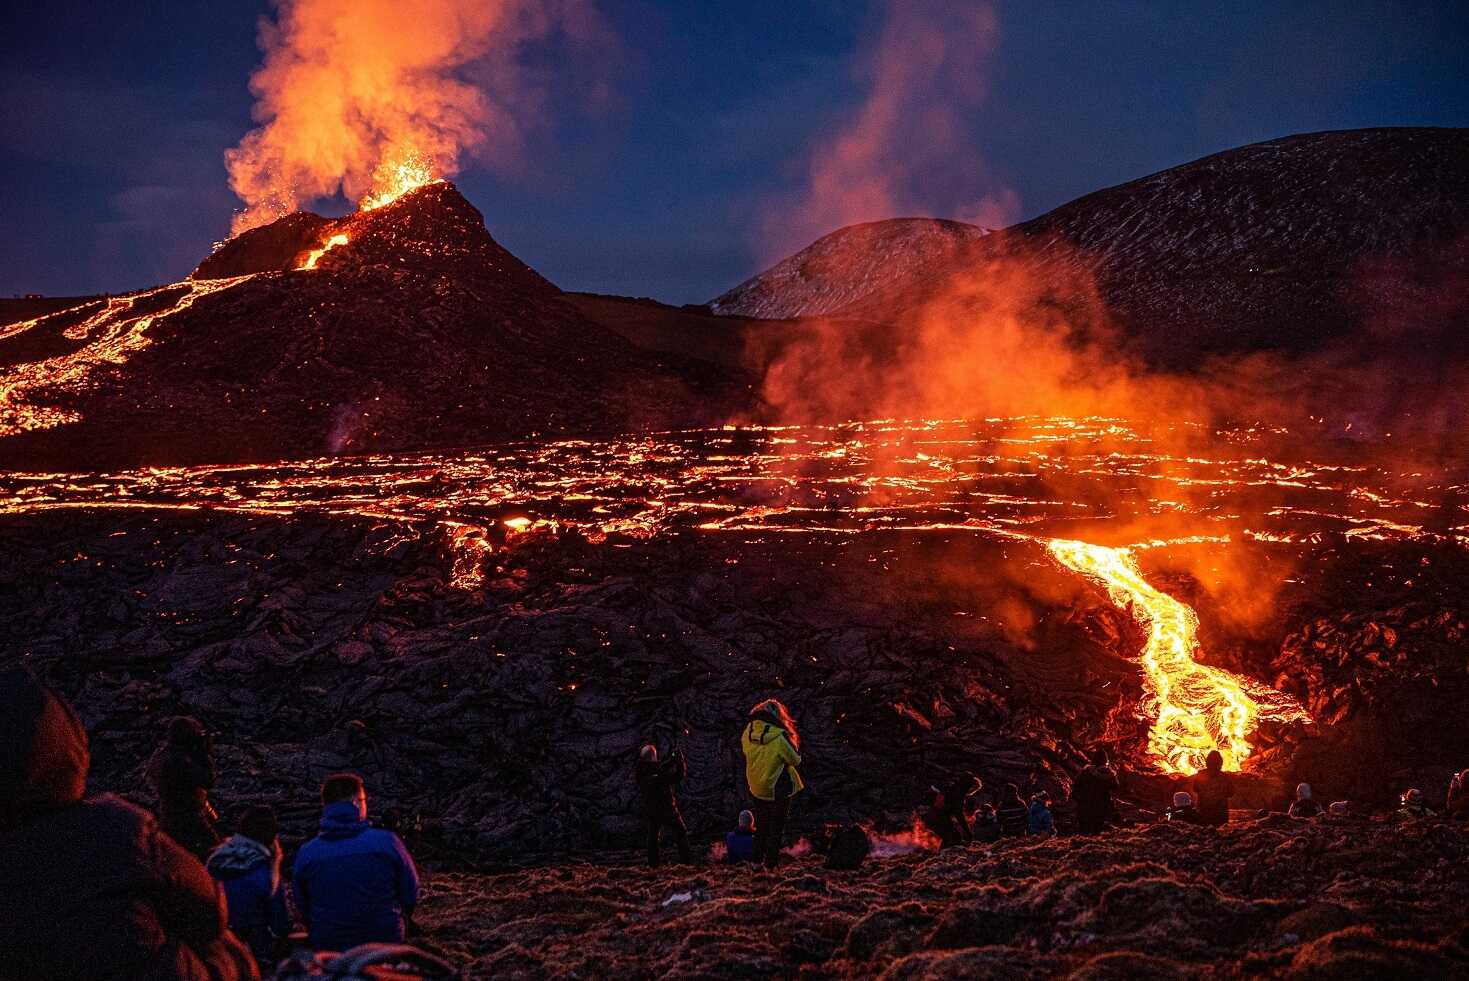 Hiking tour to the volcano eruption in Iceland 